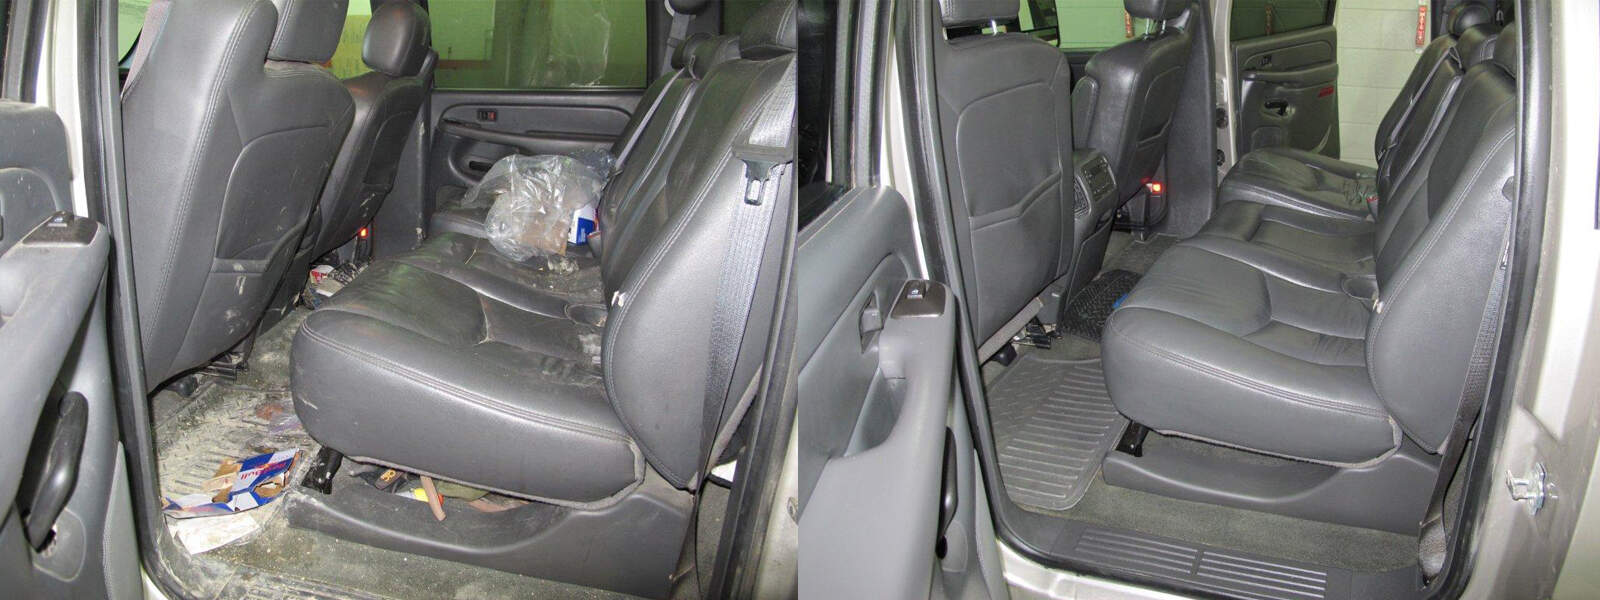 Side-by-side image of the same vehicle interior, both dirty and clean